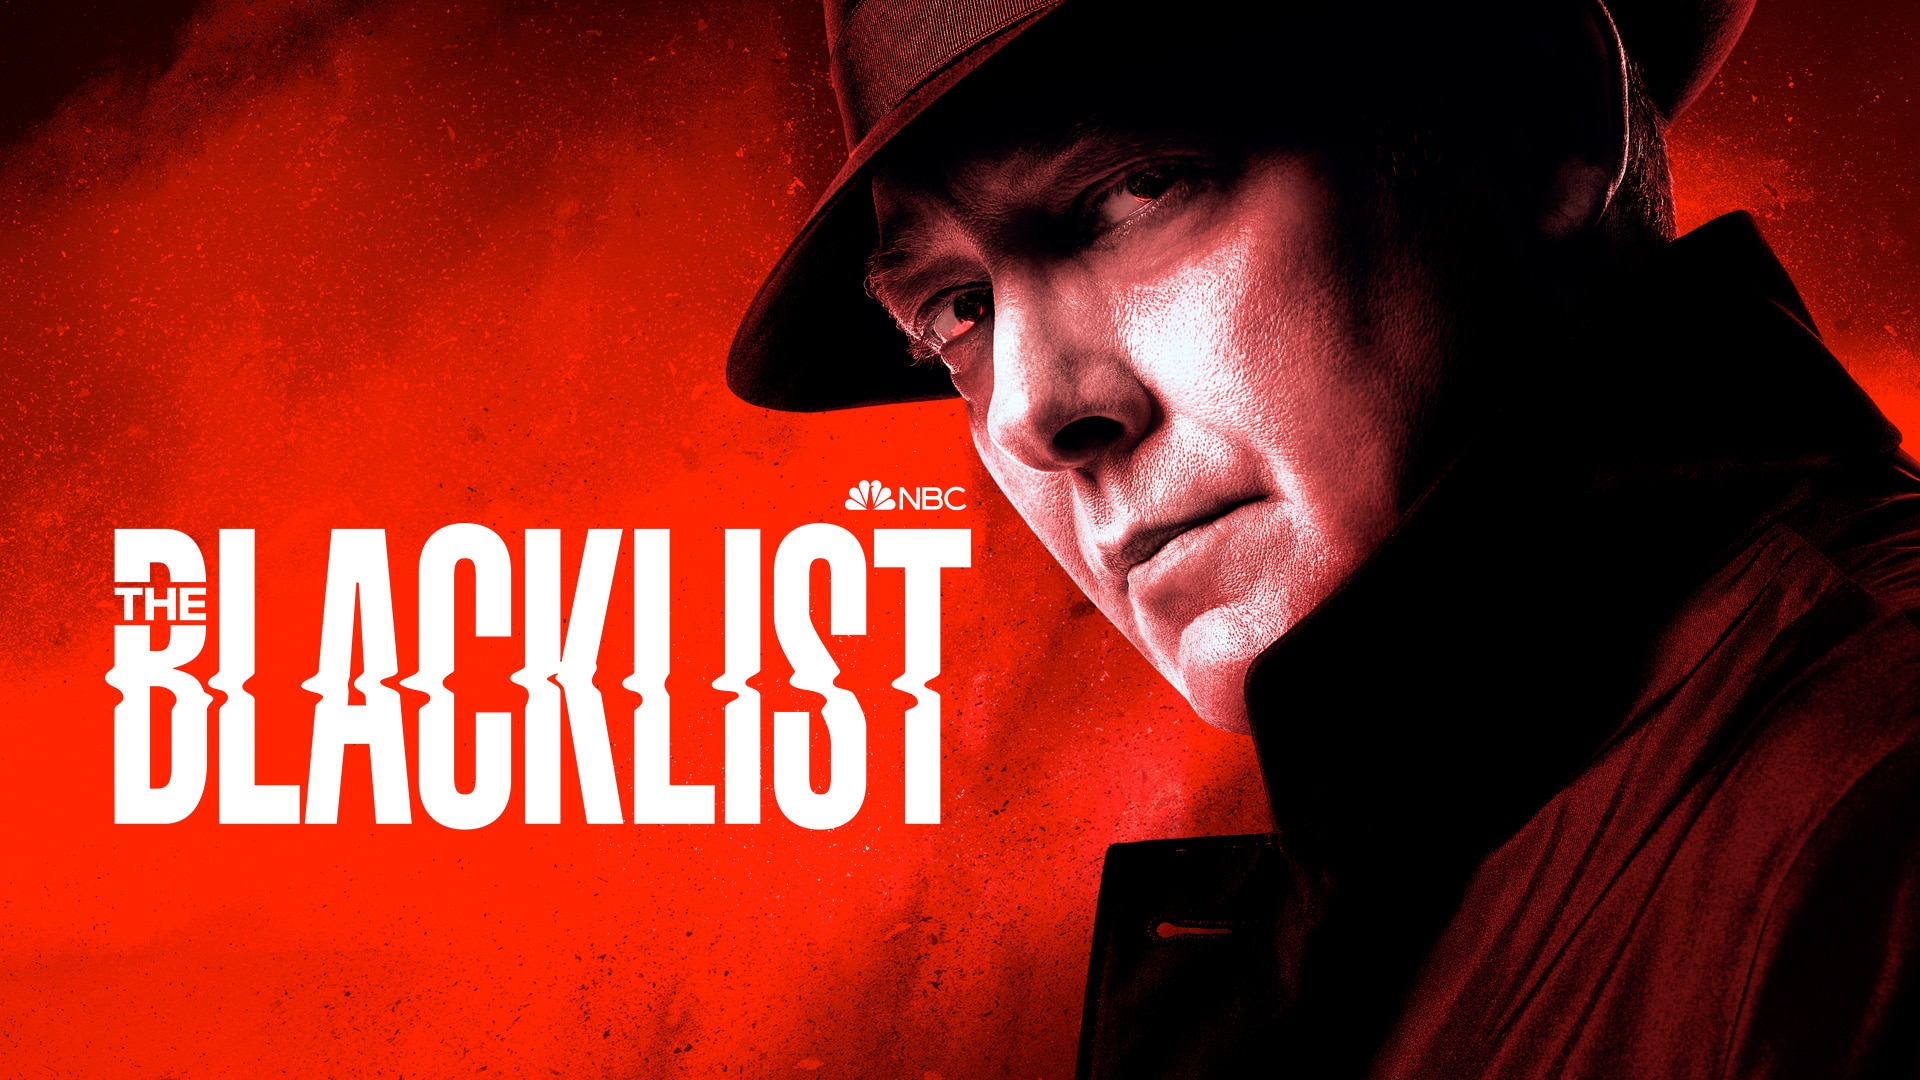 The Blacklist on FREECABLE TV